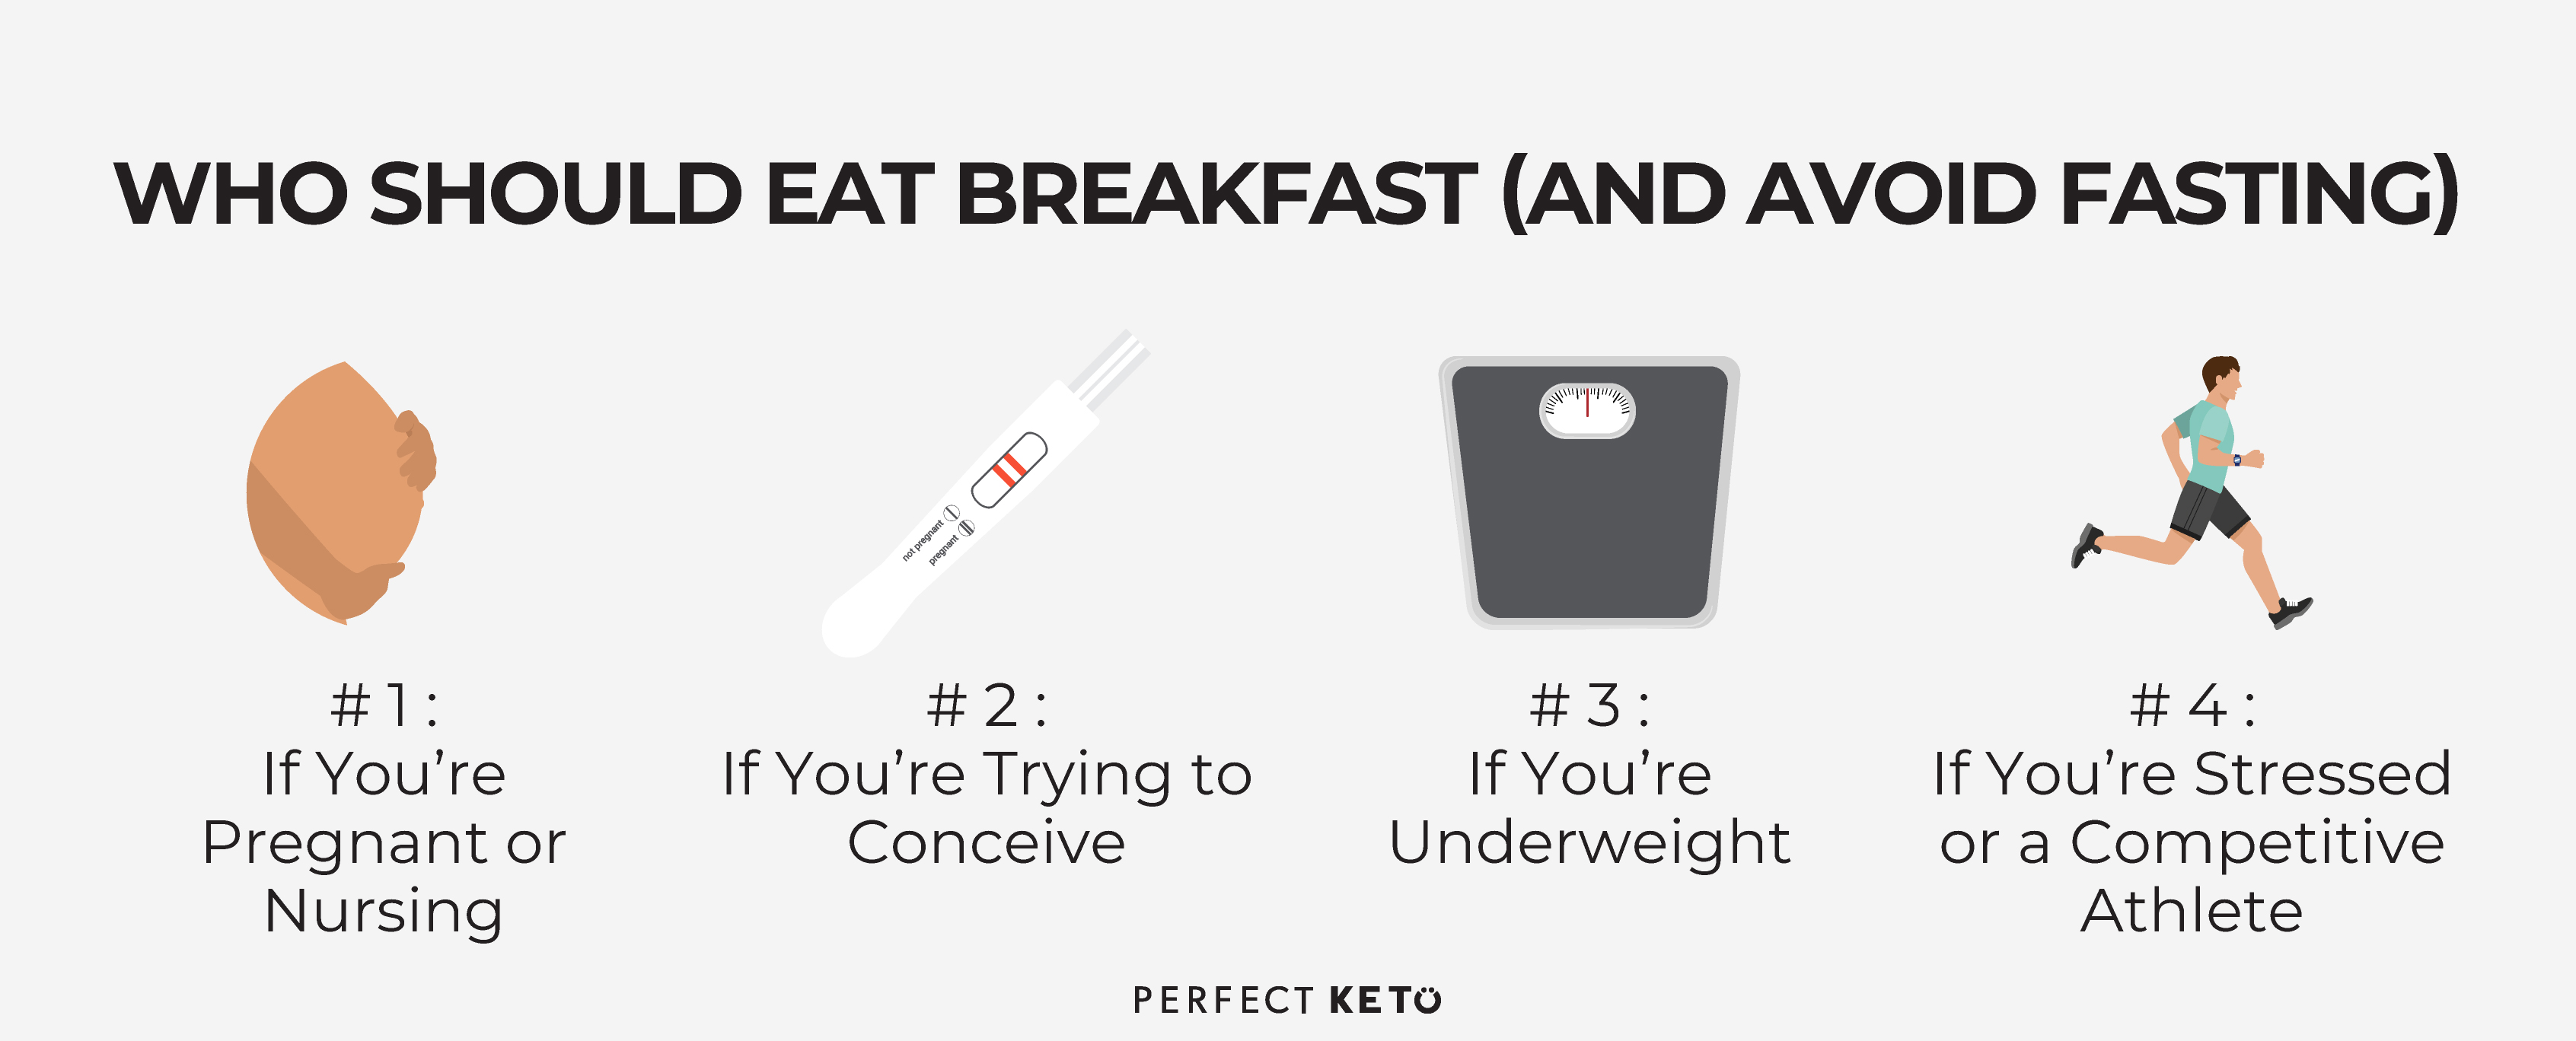 who-should-eat-breakfast-and-avoid-fasting.jpg